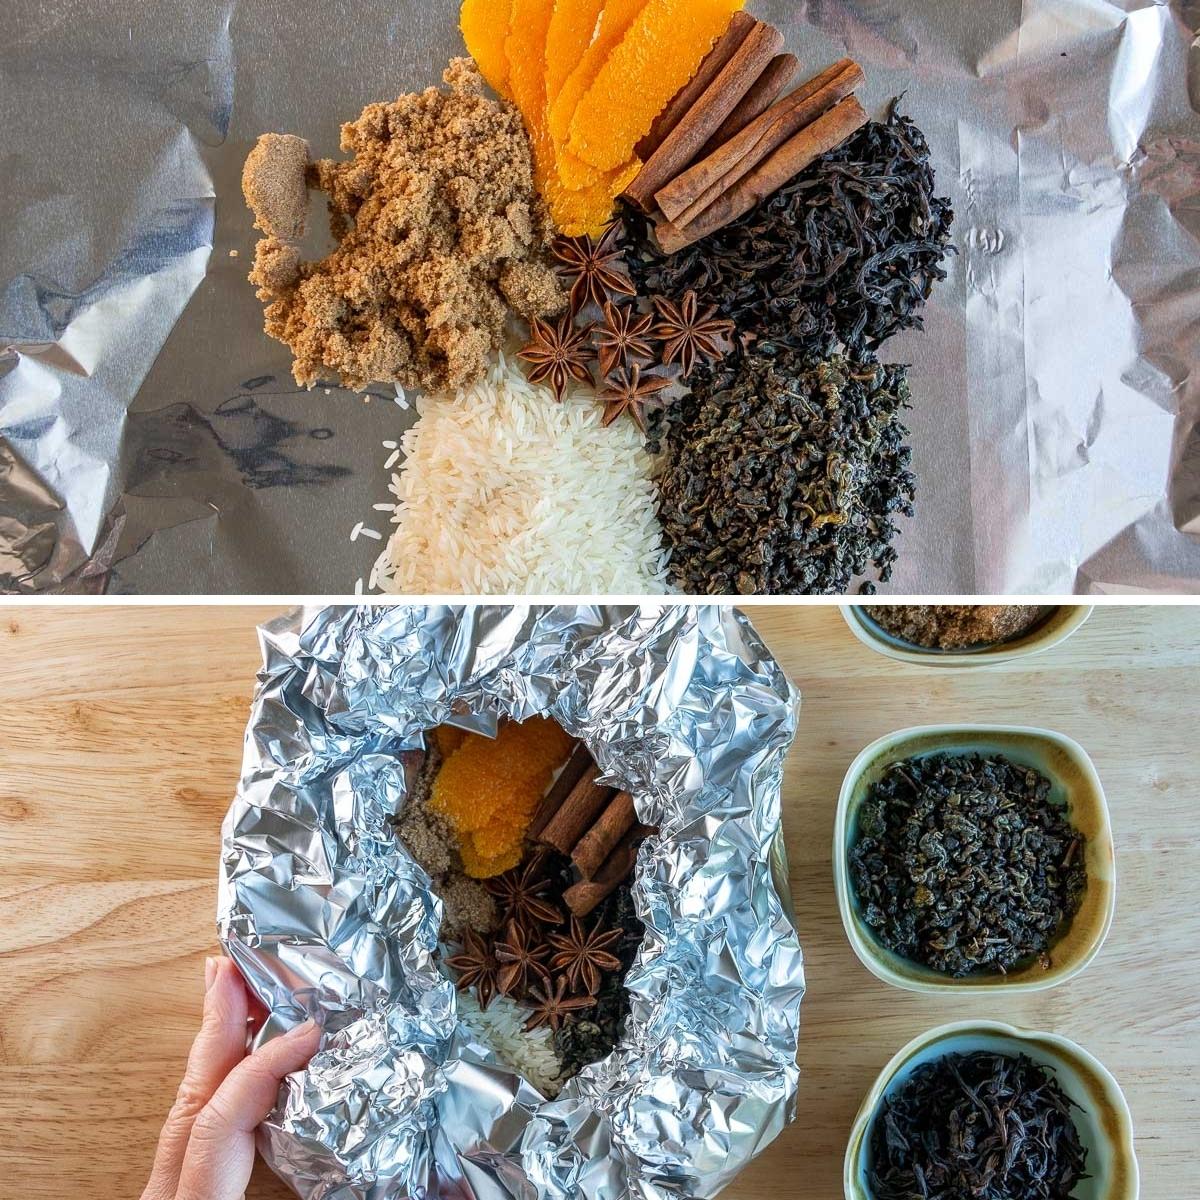 Tea smoking packet combined with tea and spices in aluminum foil.